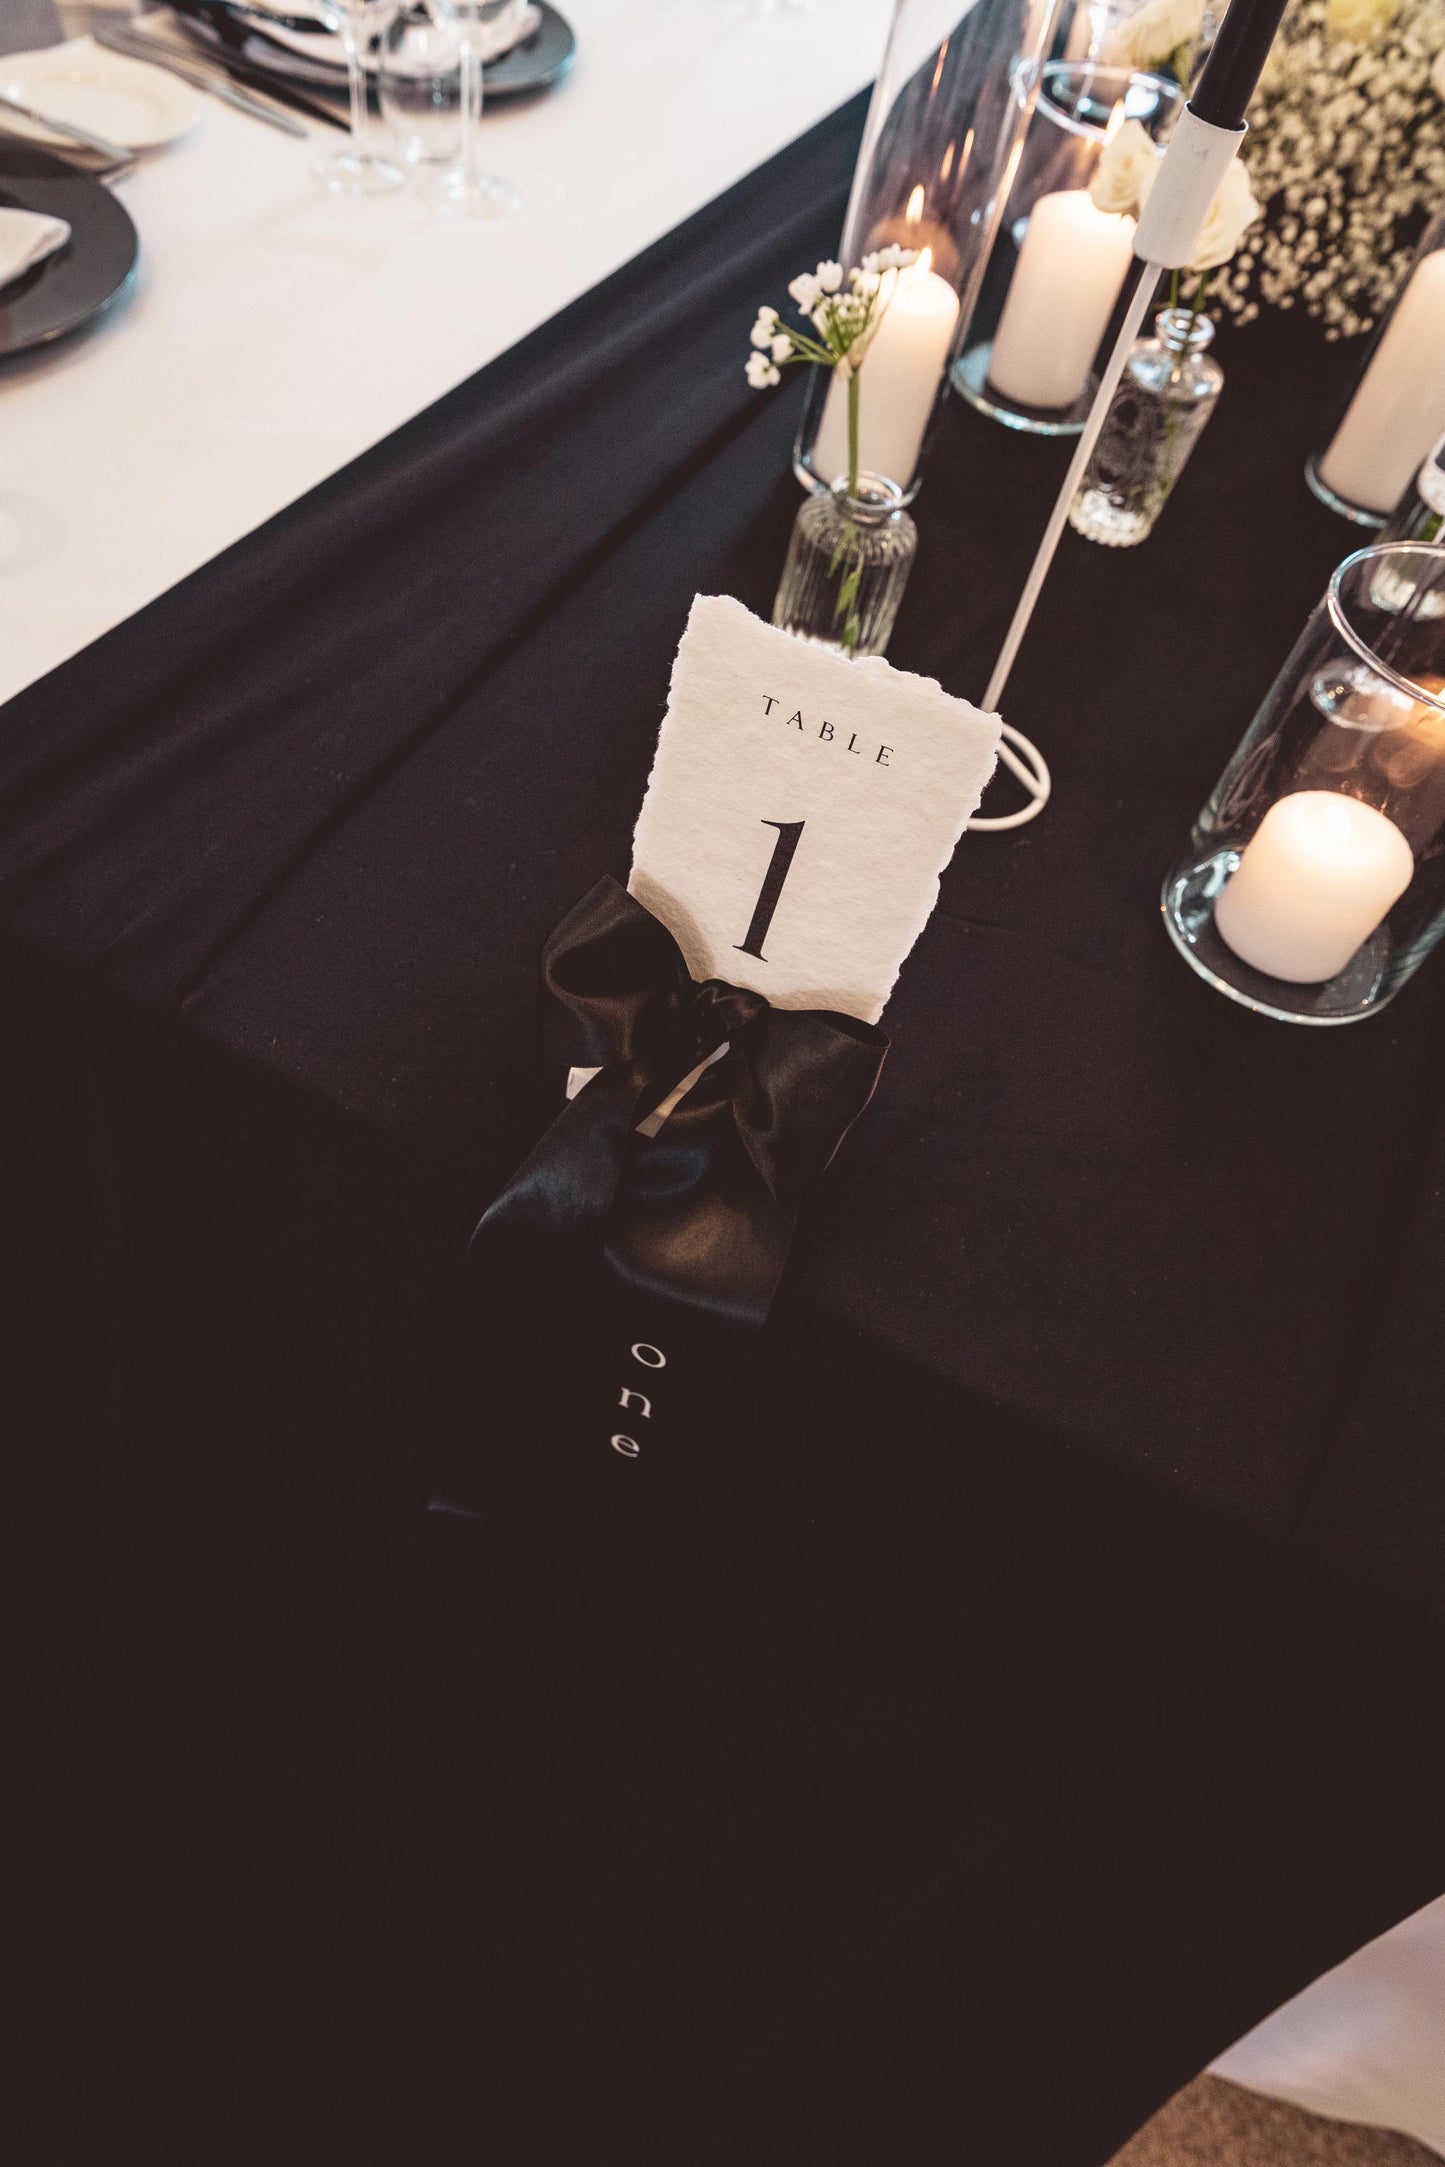 Hand crafted Monochrome Table number with Black Satin Bow